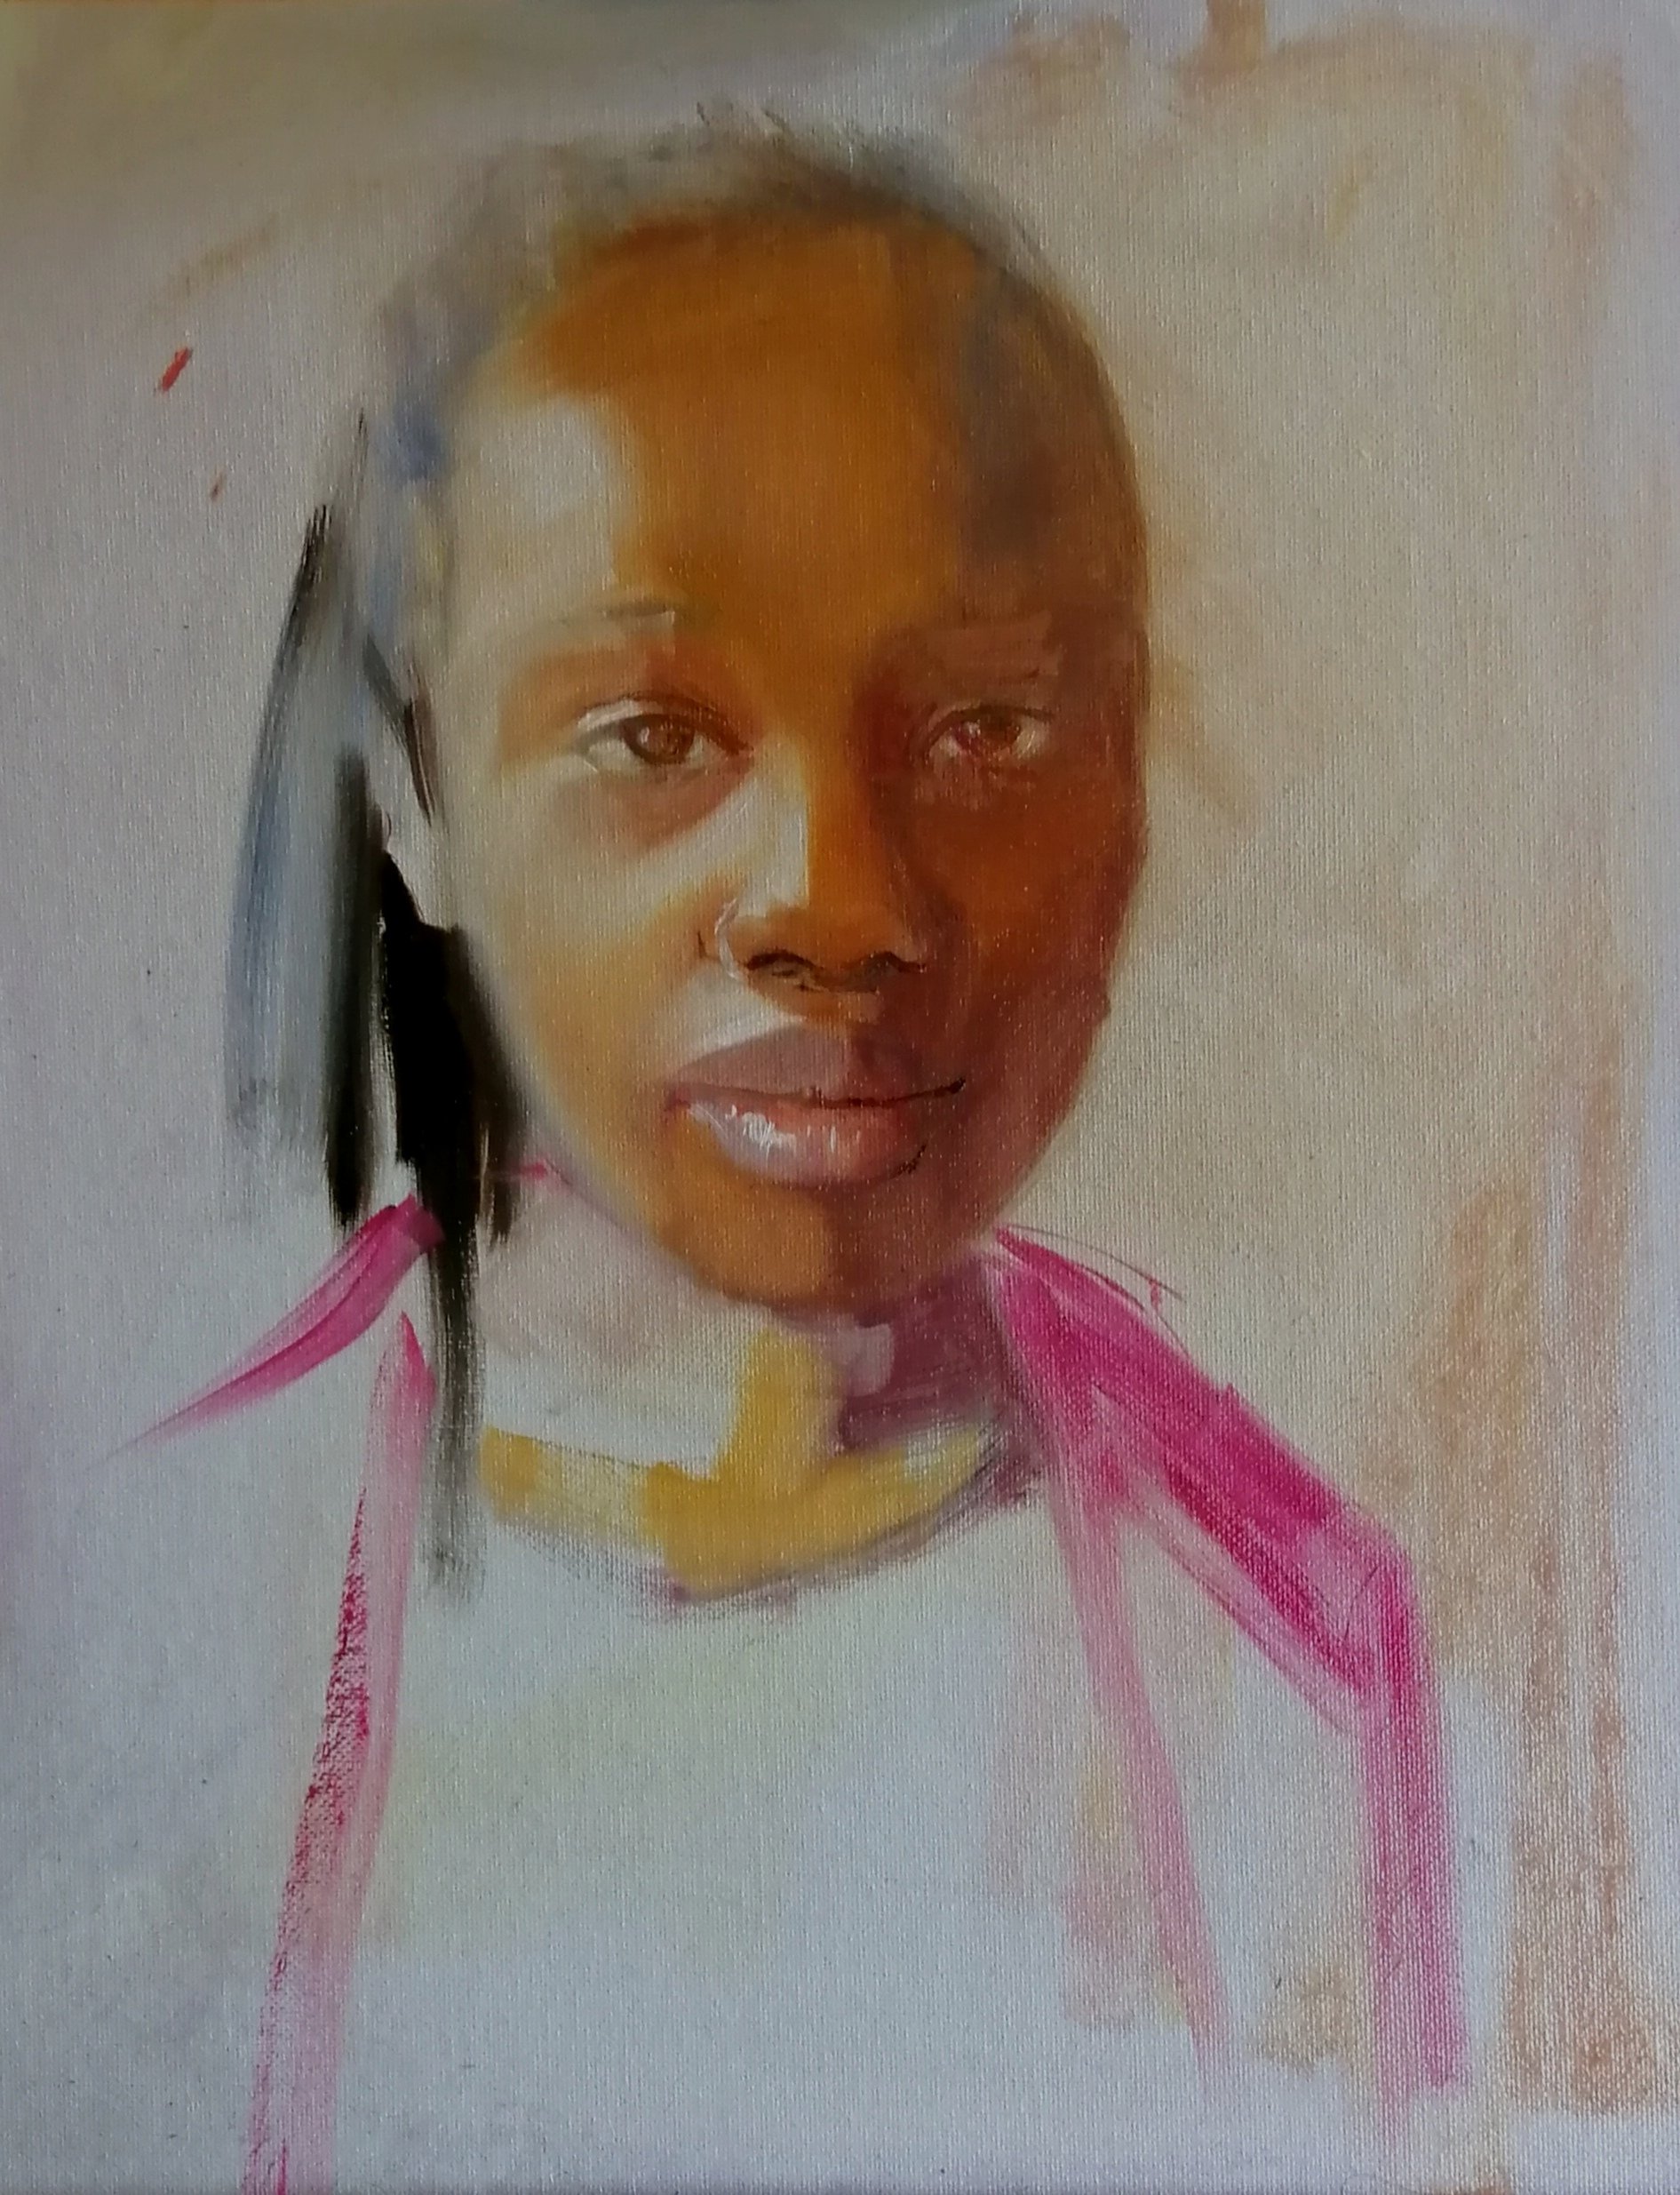  Plaits, day 1   Oil on board 